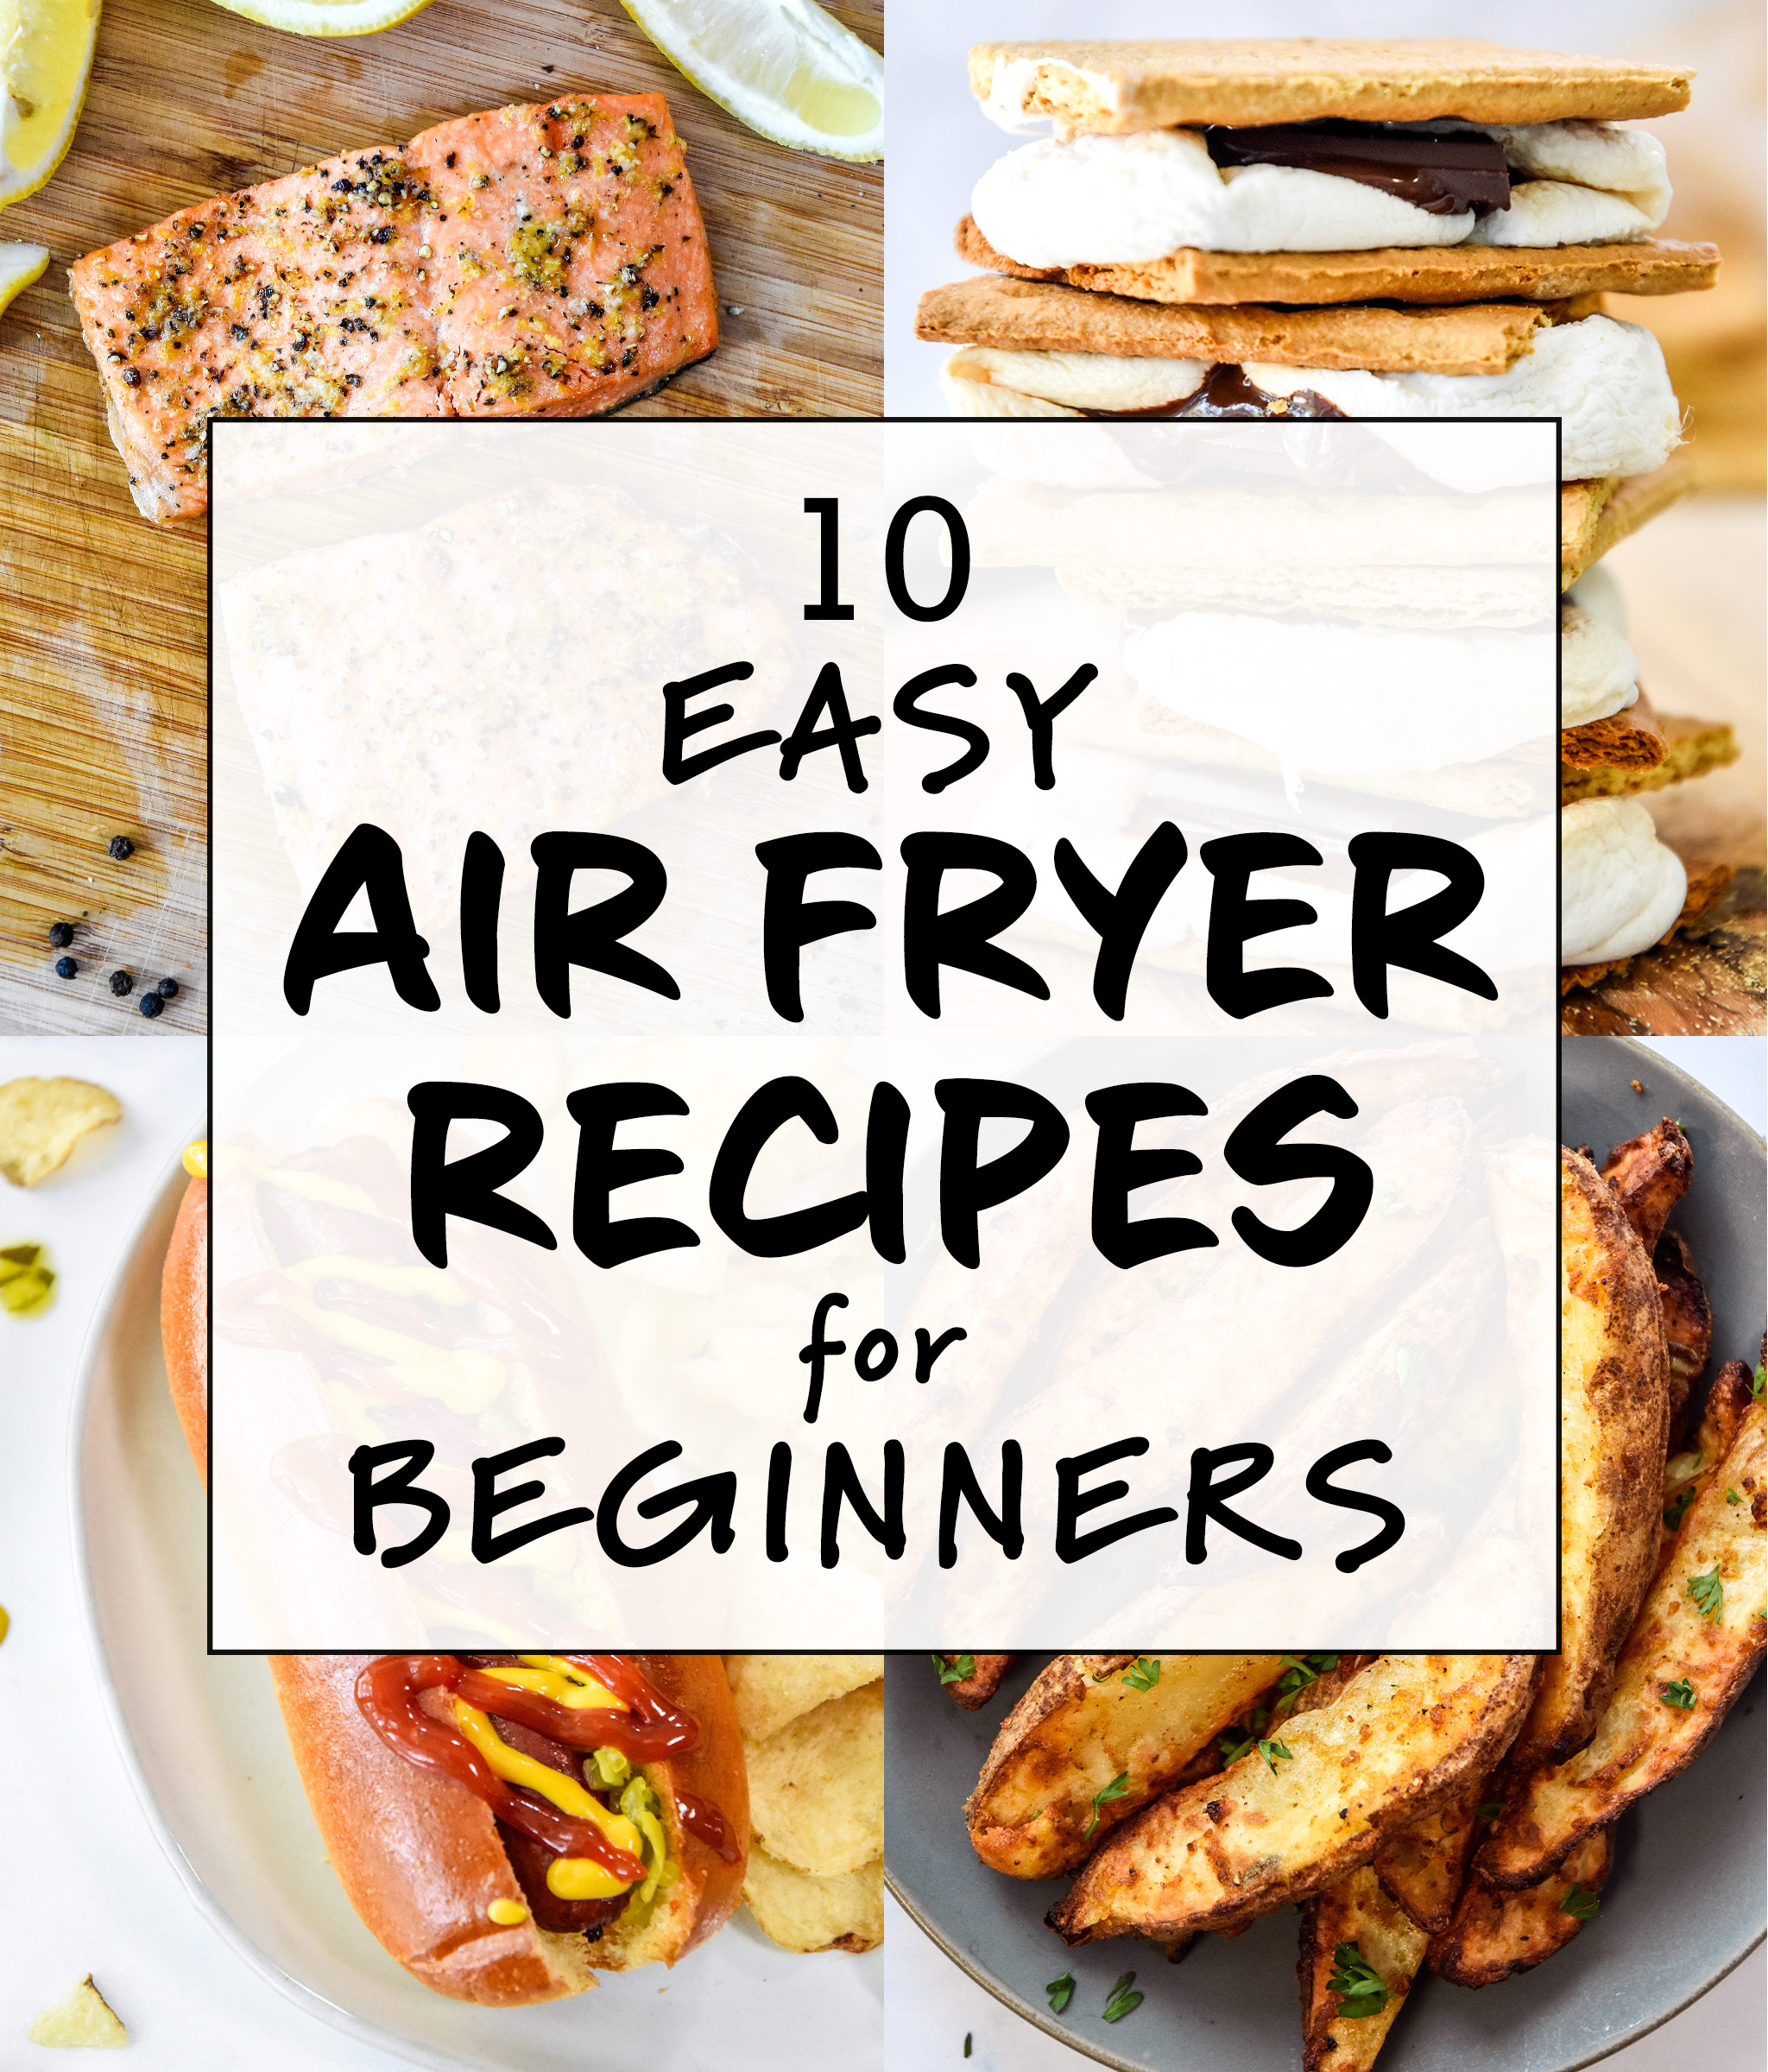 cover image for the post 10 easy air fryer recipes for beginners with potato wedges, salmon, hot dogs, and smores.